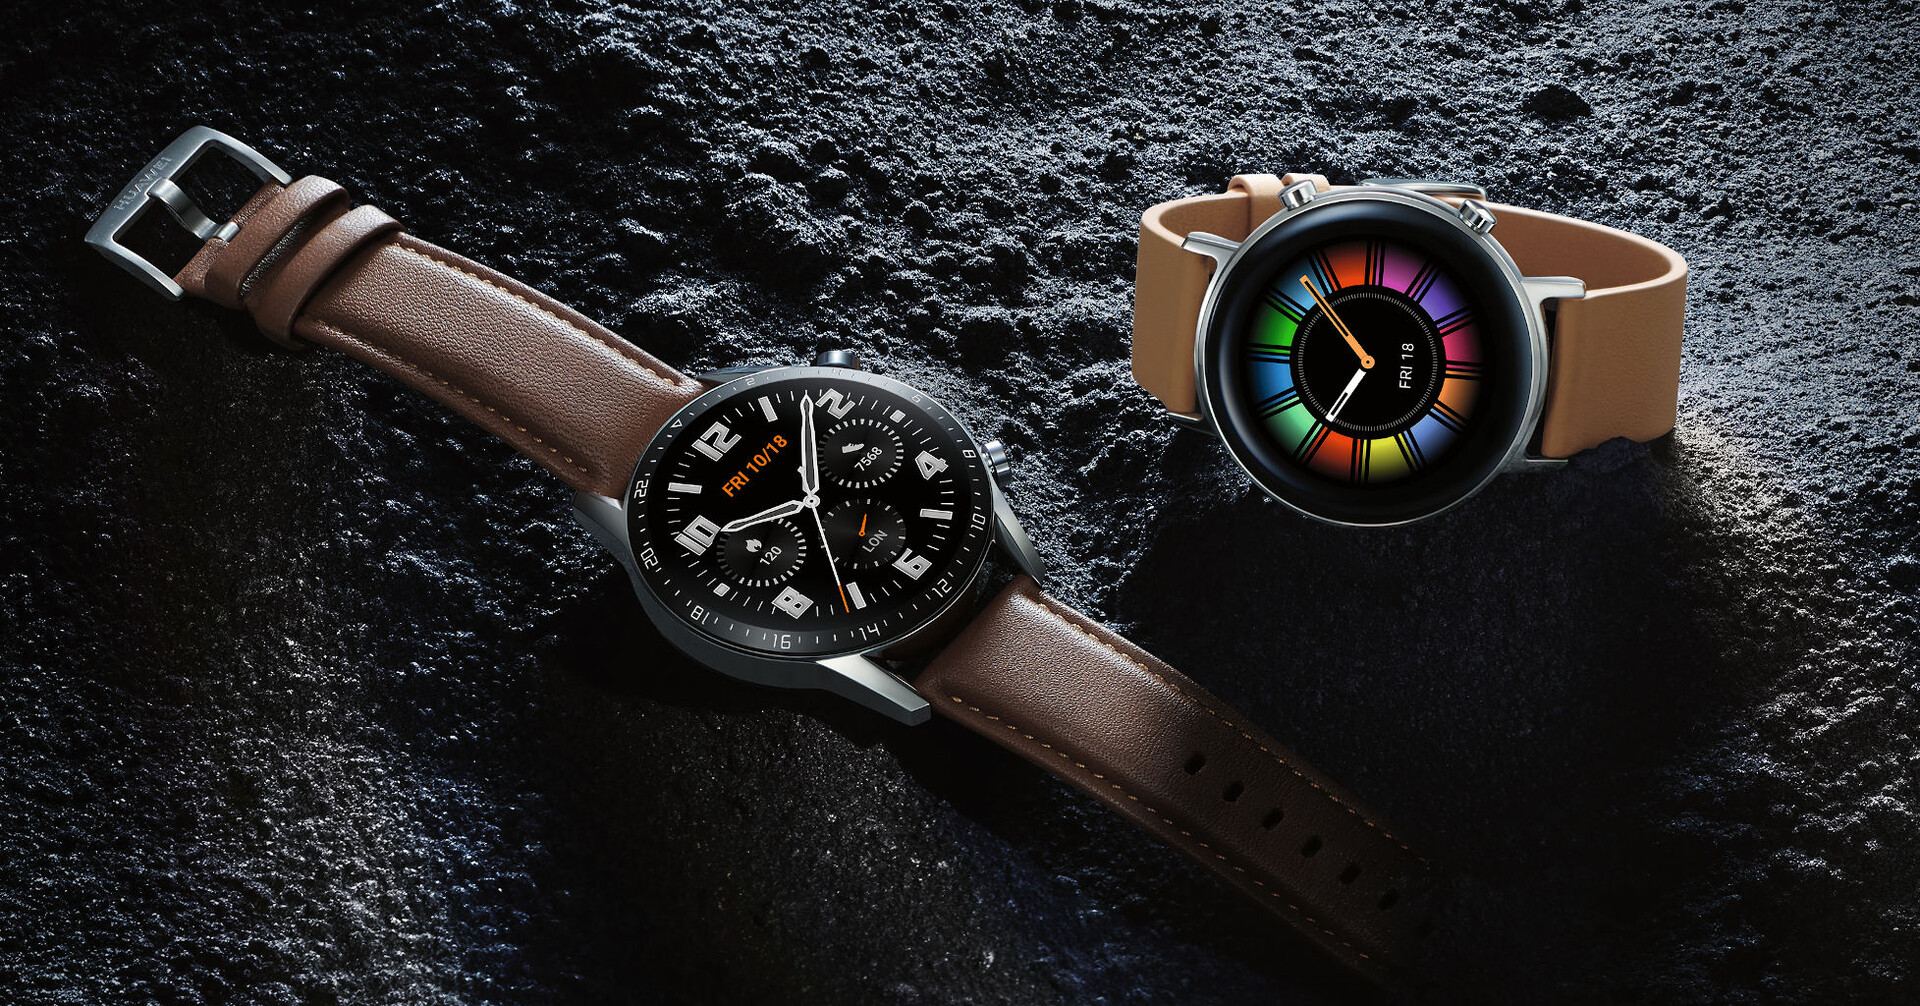 HUAWEI Watch GT 2 review: Great fitness tracker, limited smartwatch